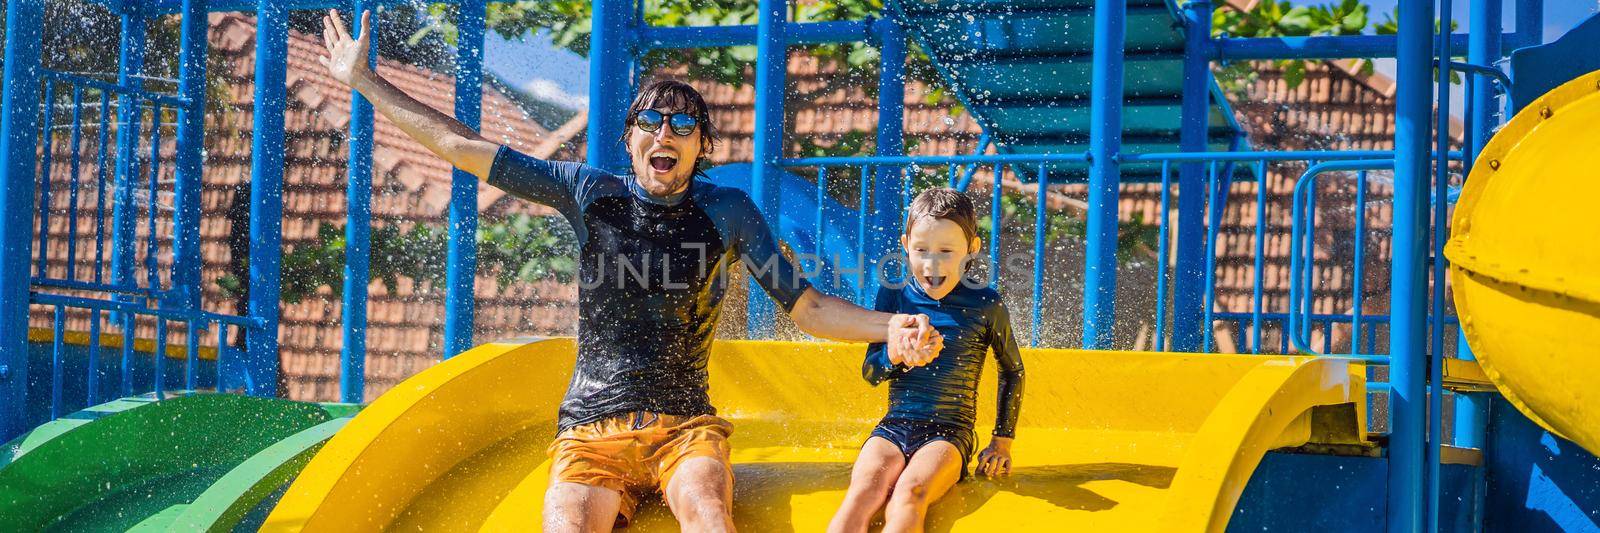 Father and son on a water slide in the water park. BANNER, LONG FORMAT